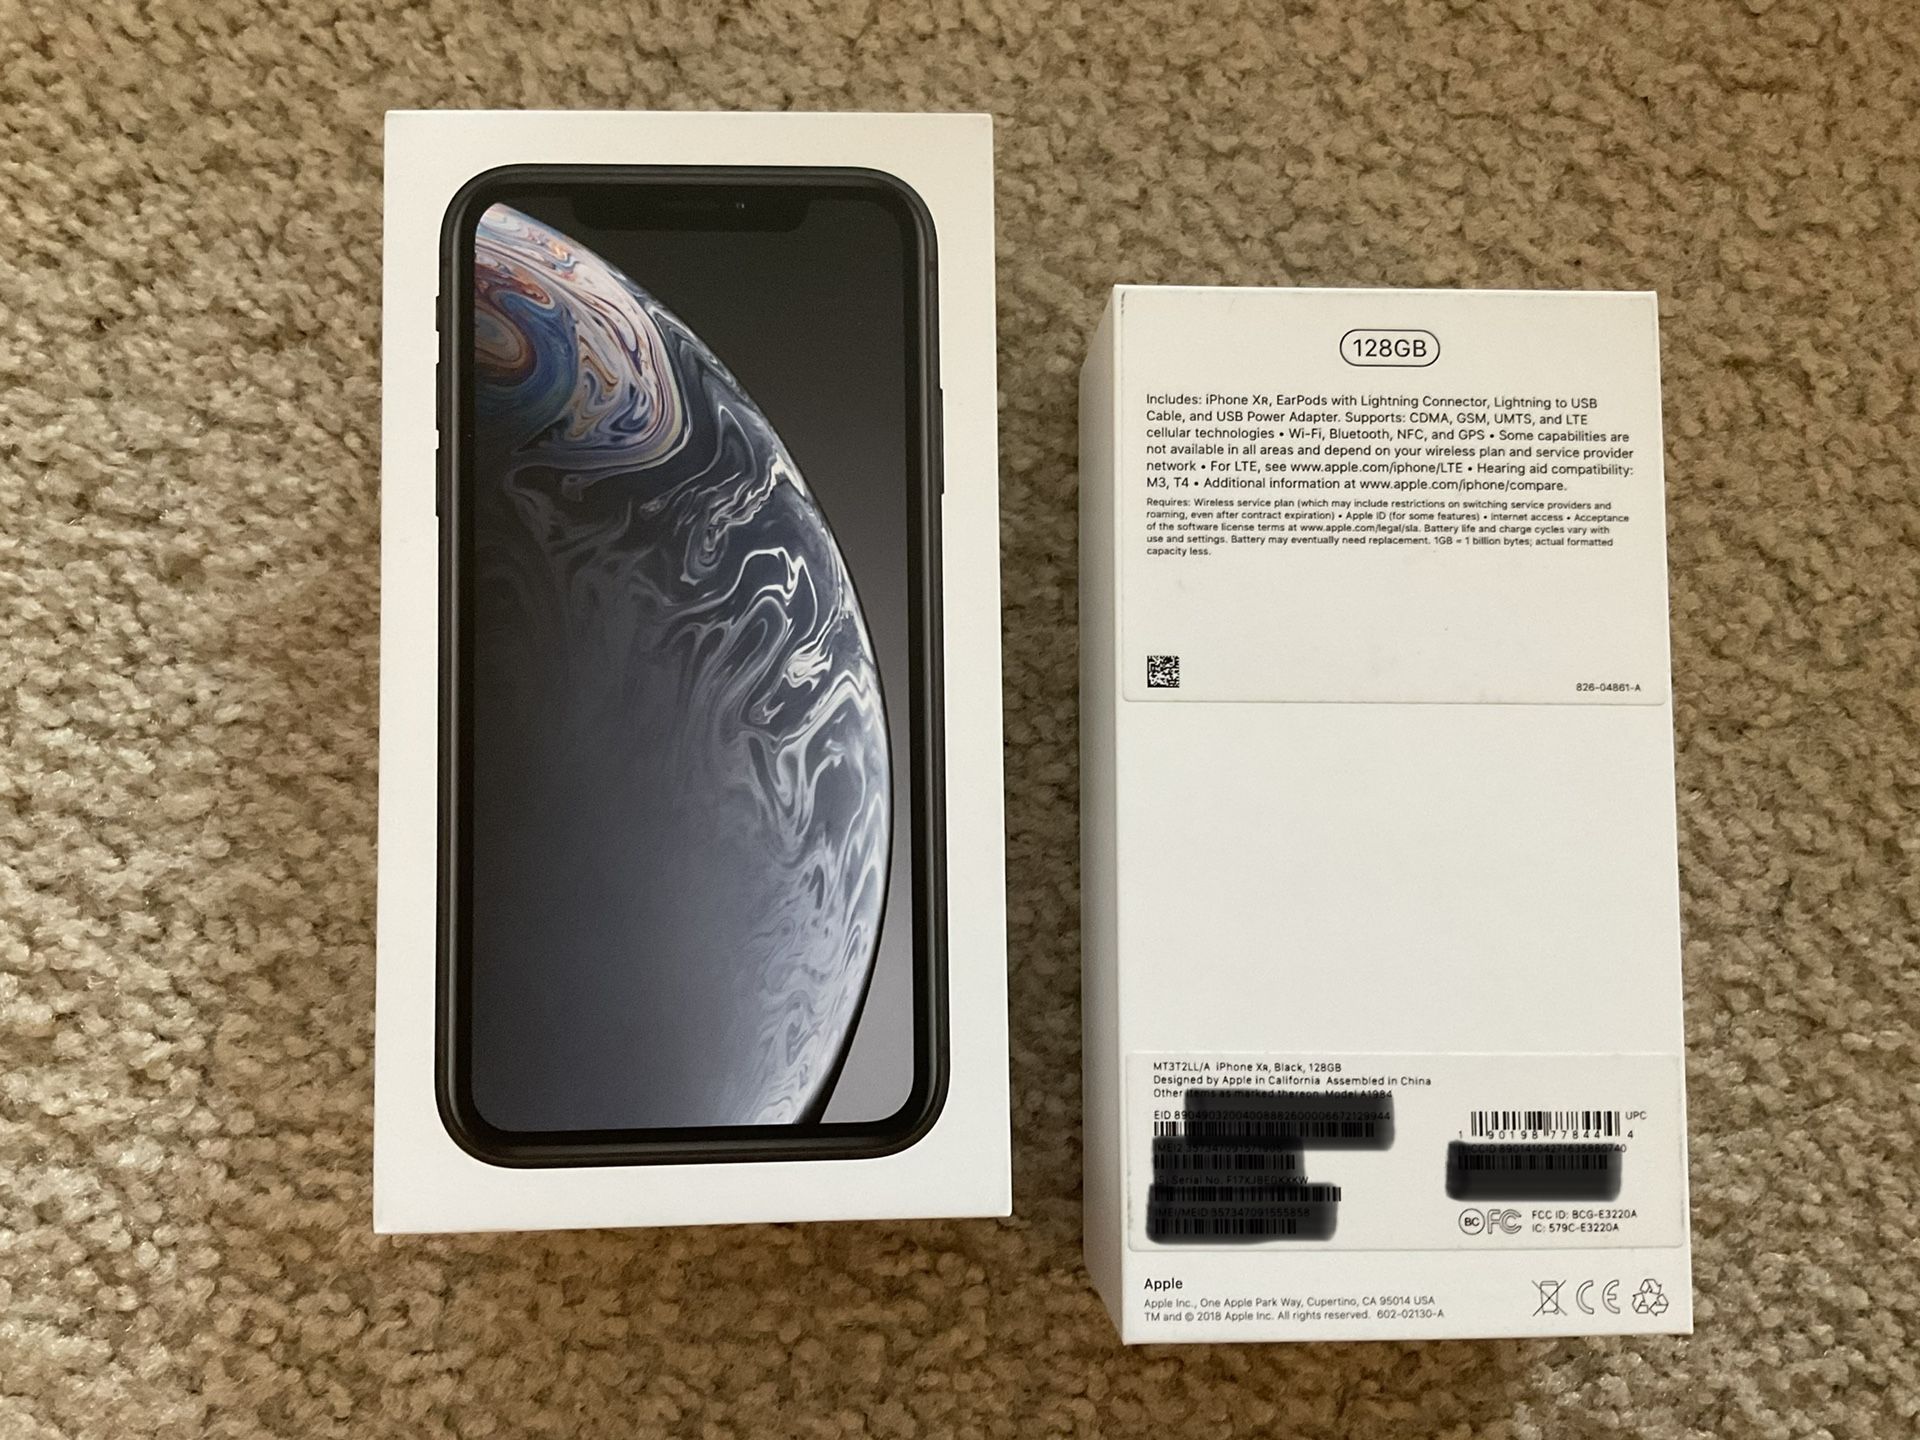 iPhone XR Black 128GB (Model MT3T2LL/A) - UNLOCKED like NEW (use as a backup Phone with Good battery life)